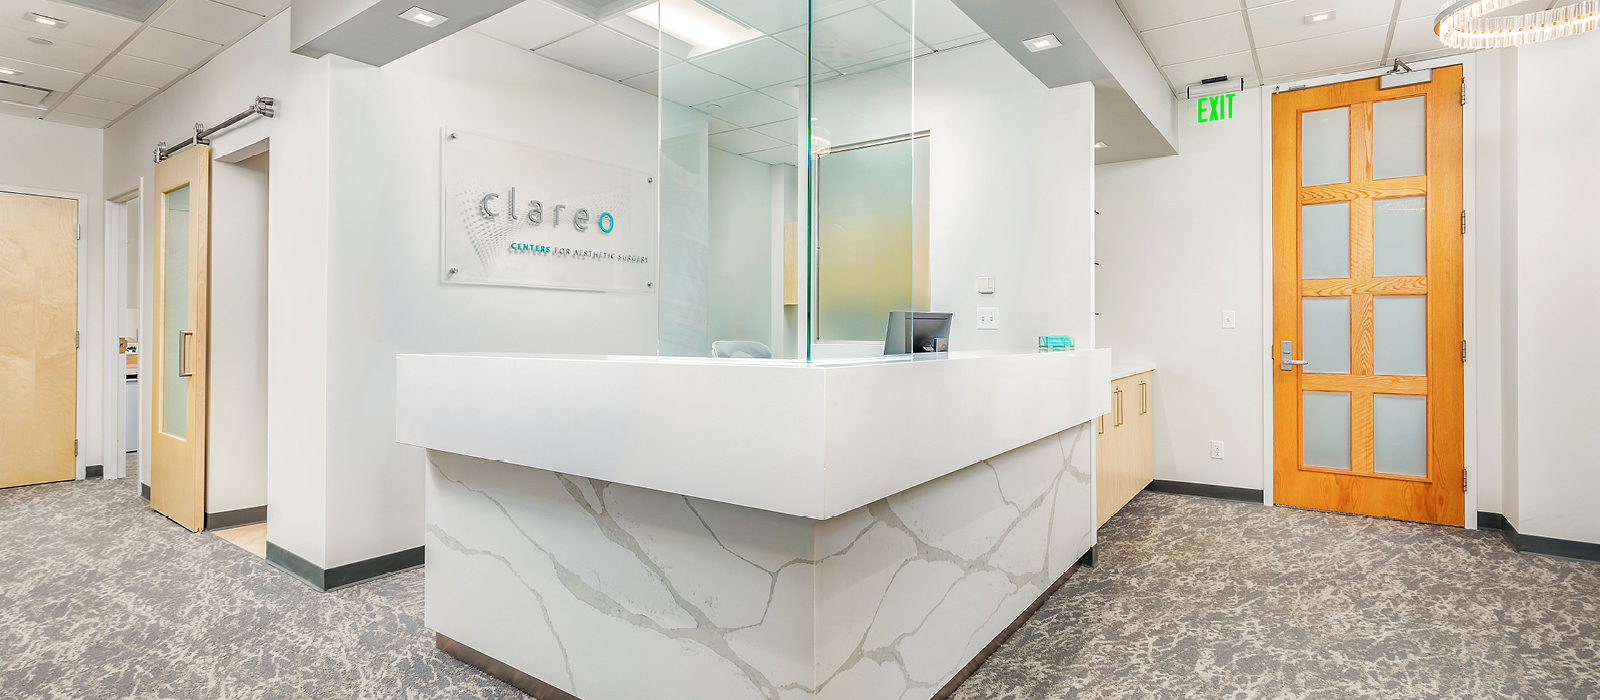 Clareo Centers For Aesthetic Surgery front desk